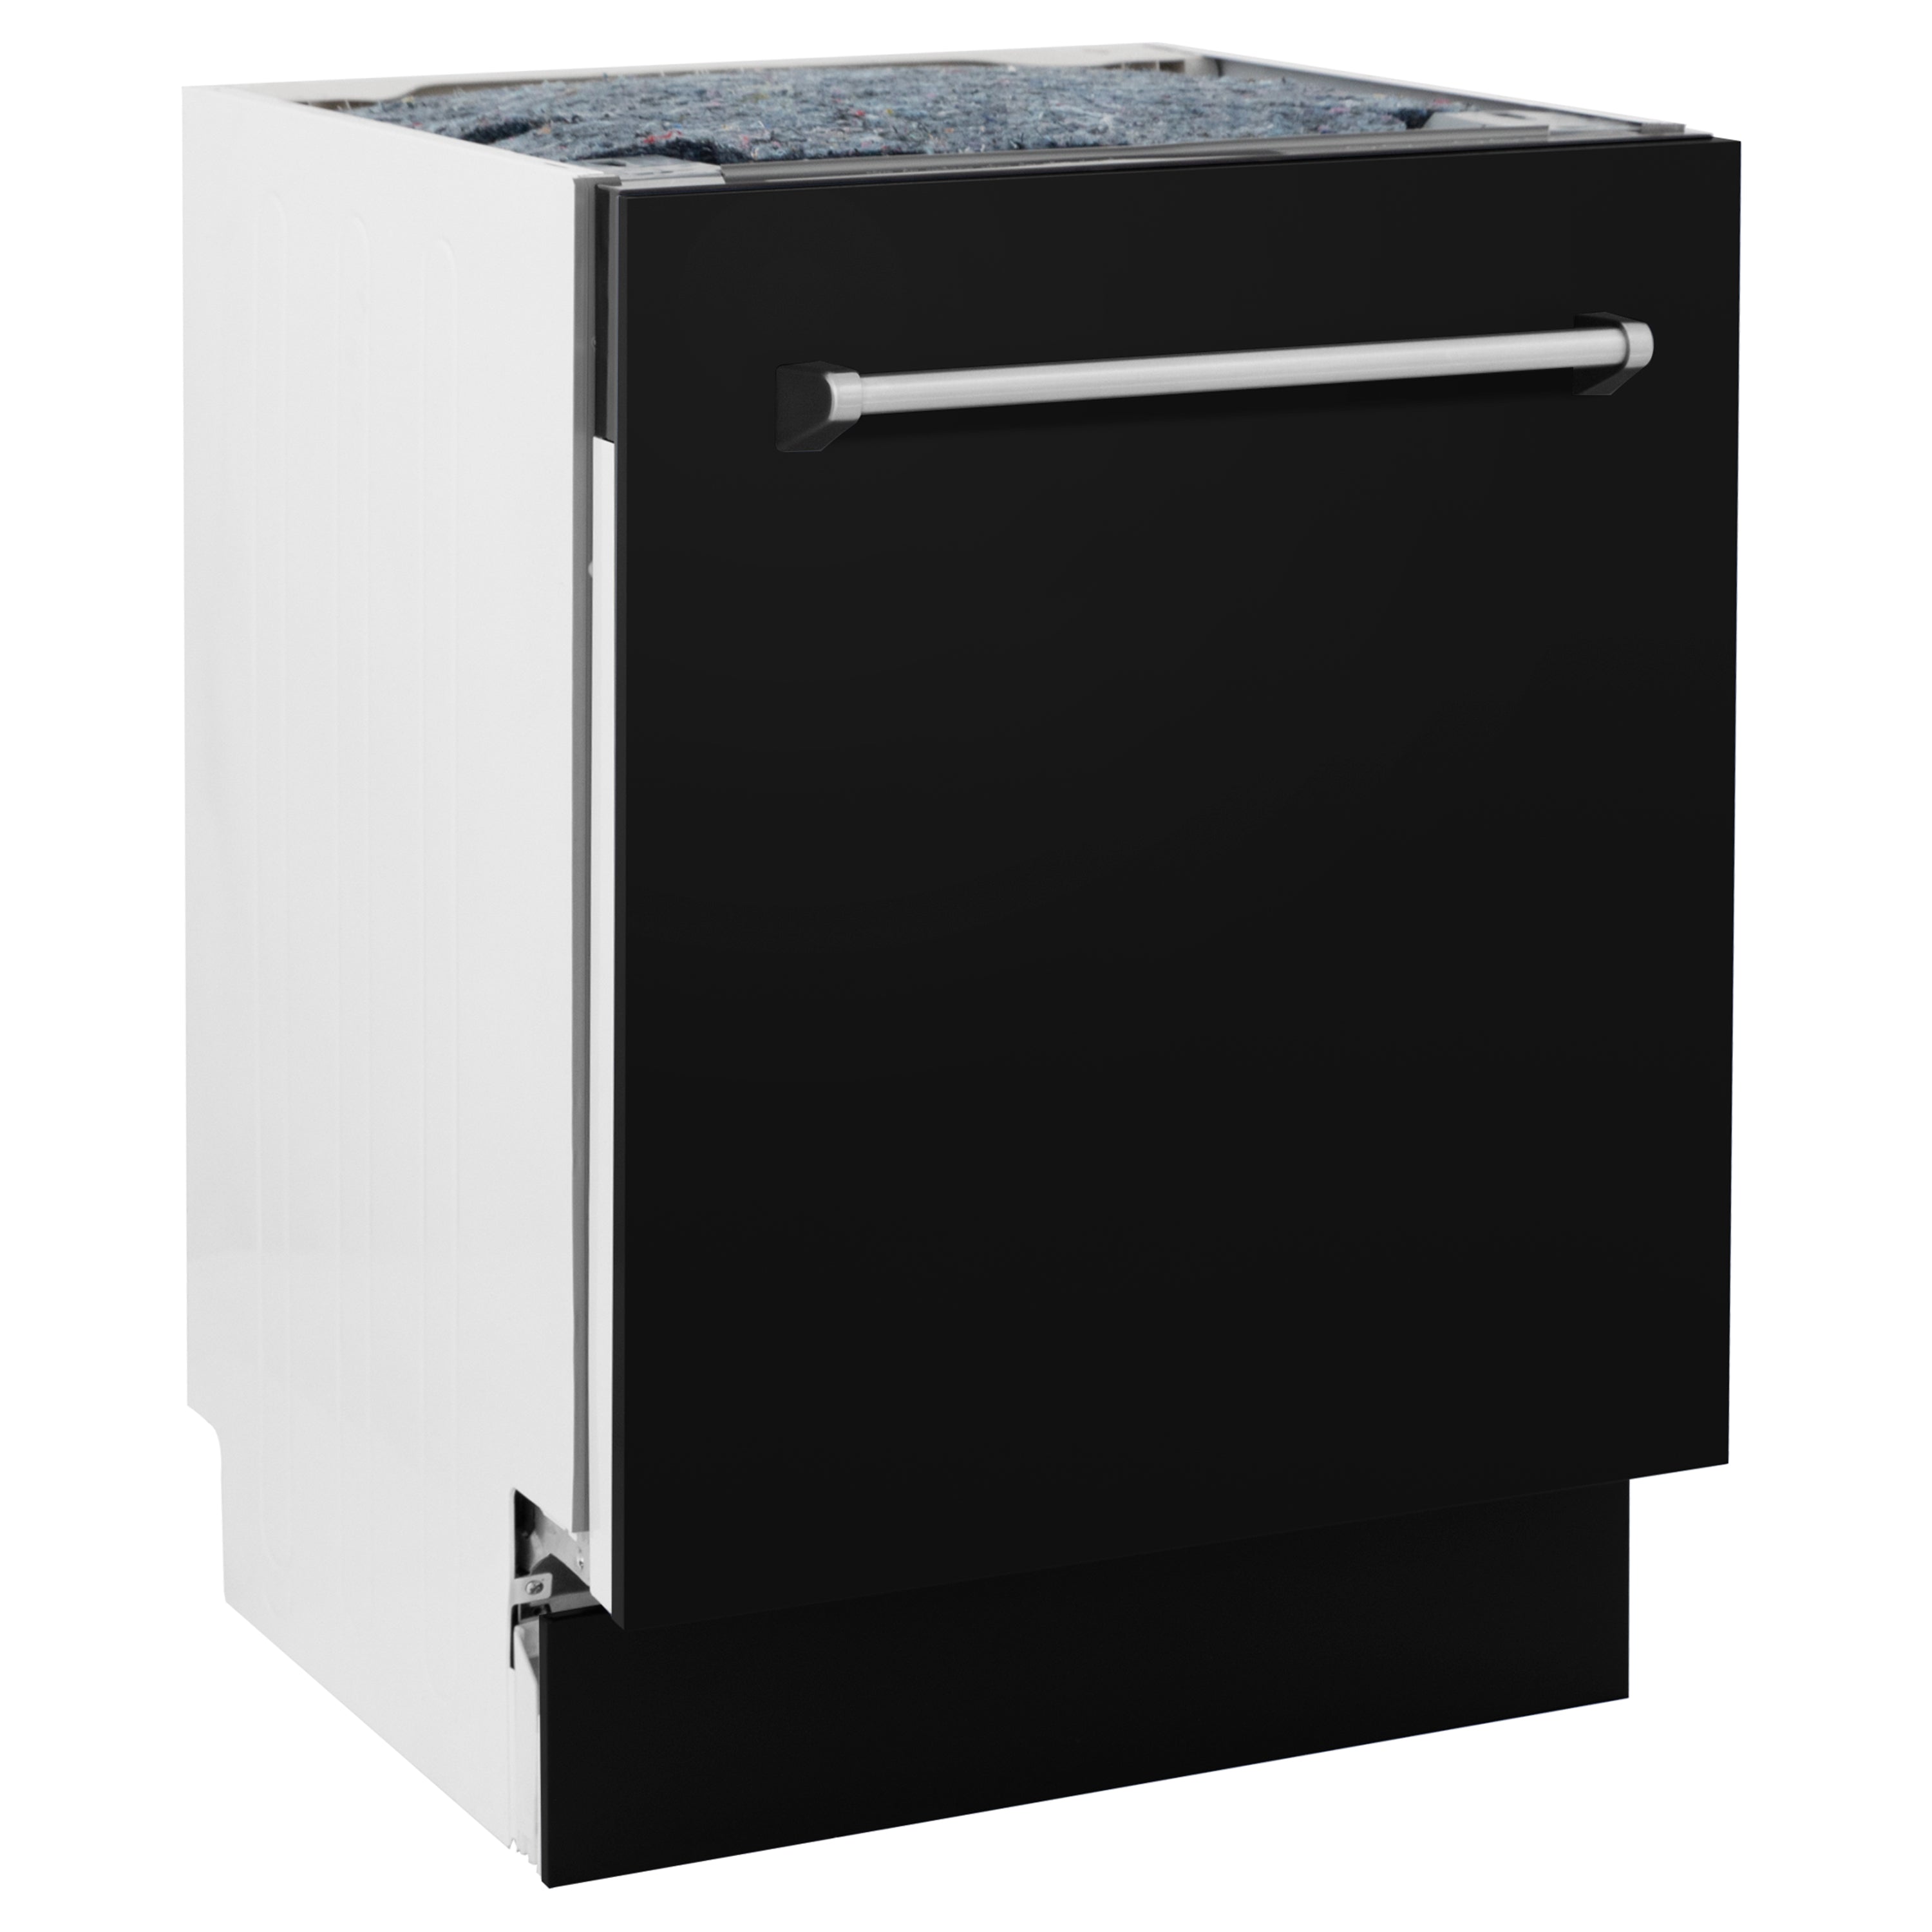 ZLINE 24" Tallac Series 3rd Rack Tall Tub Dishwasher in Black Matte with Stainless Steel Tub, 51dBa (DWV-BLM-24)